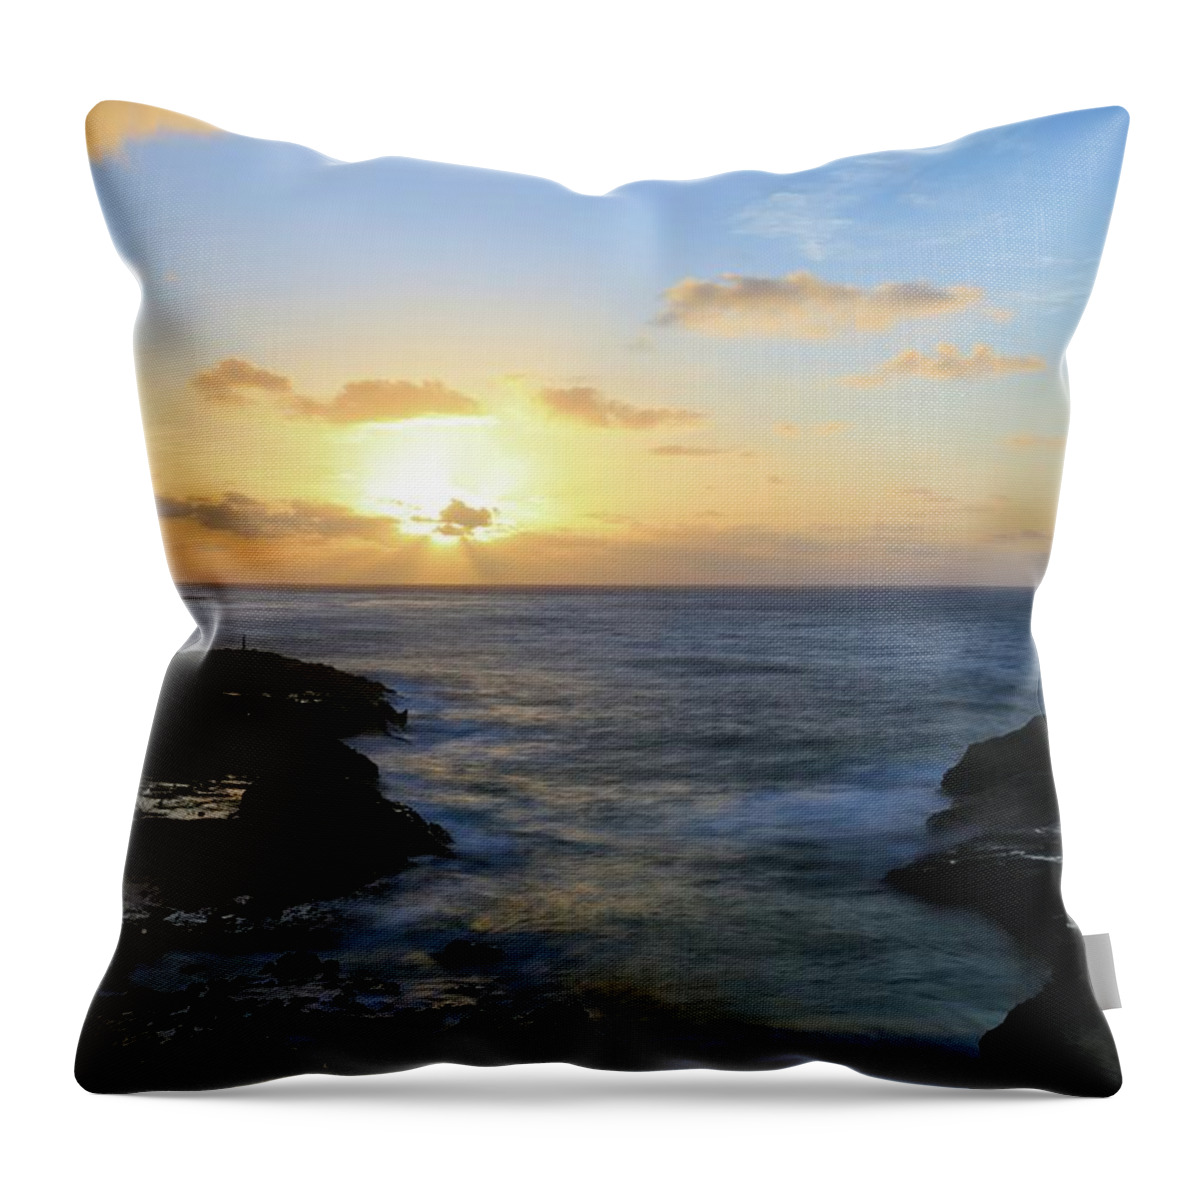 Photosbymch Throw Pillow featuring the photograph Here to Eternity by M C Hood